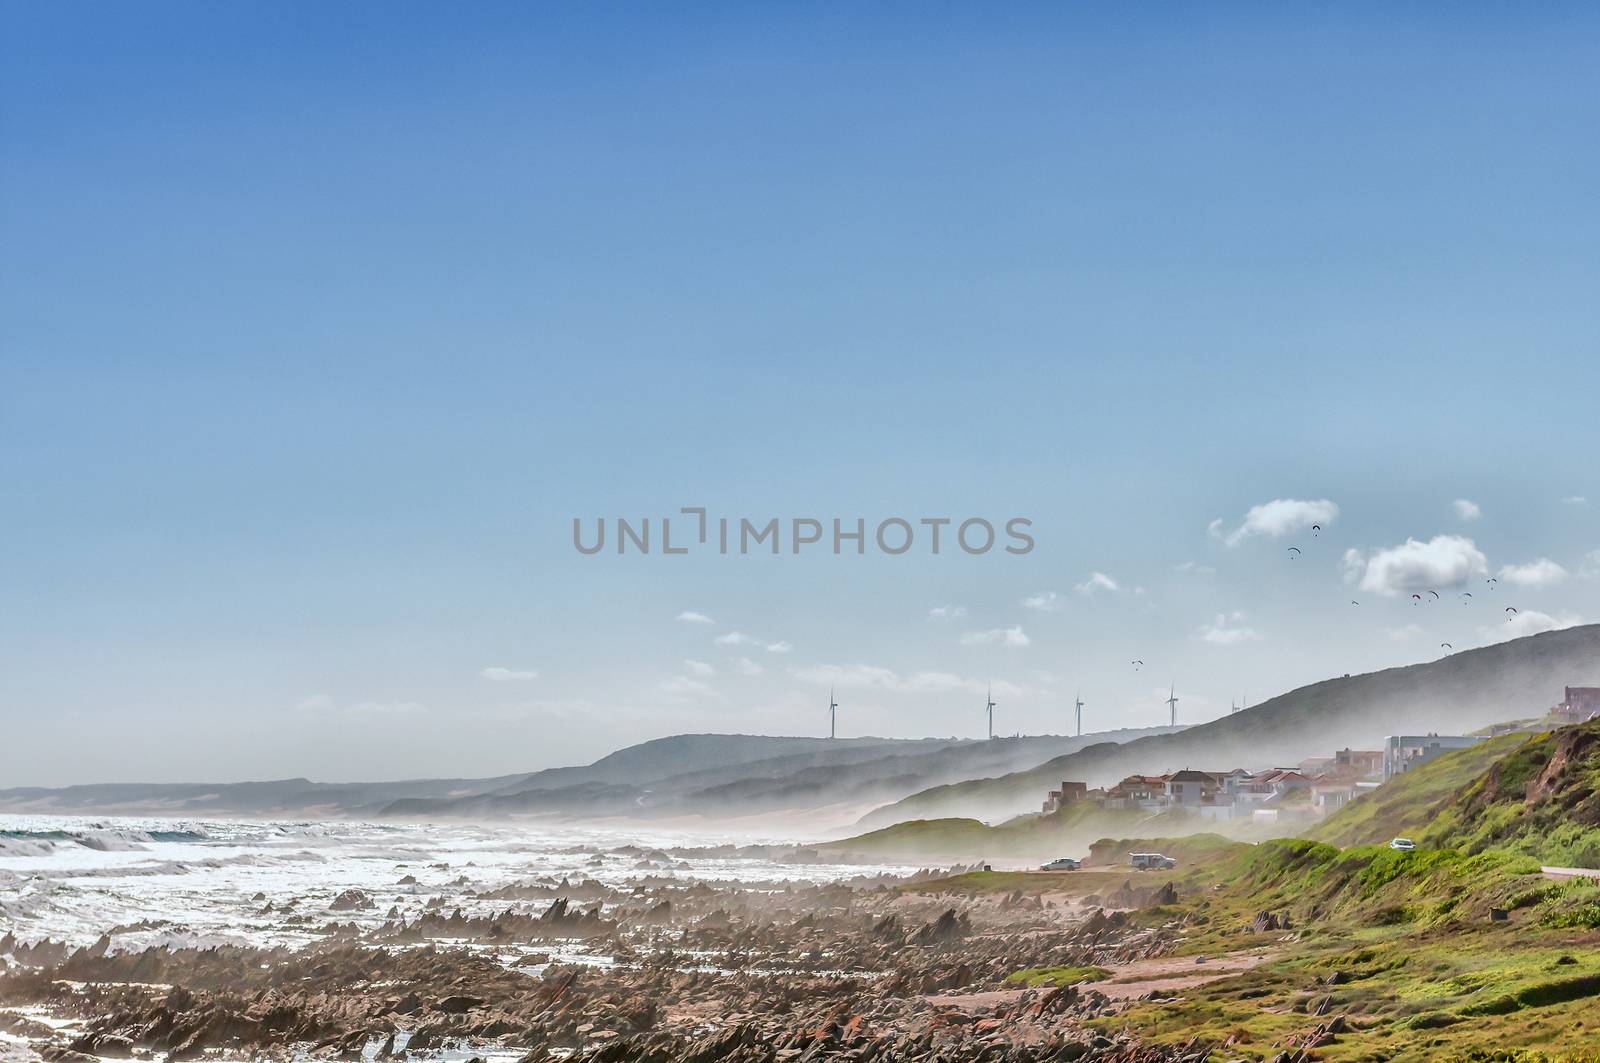 PORT ELIZABETH, SOUTH AFRICA - FEBRUARY 27, 2016:  Paragliders in the air at Beachview near Port Elizabeth with fog moving in. Wind turbines are visible